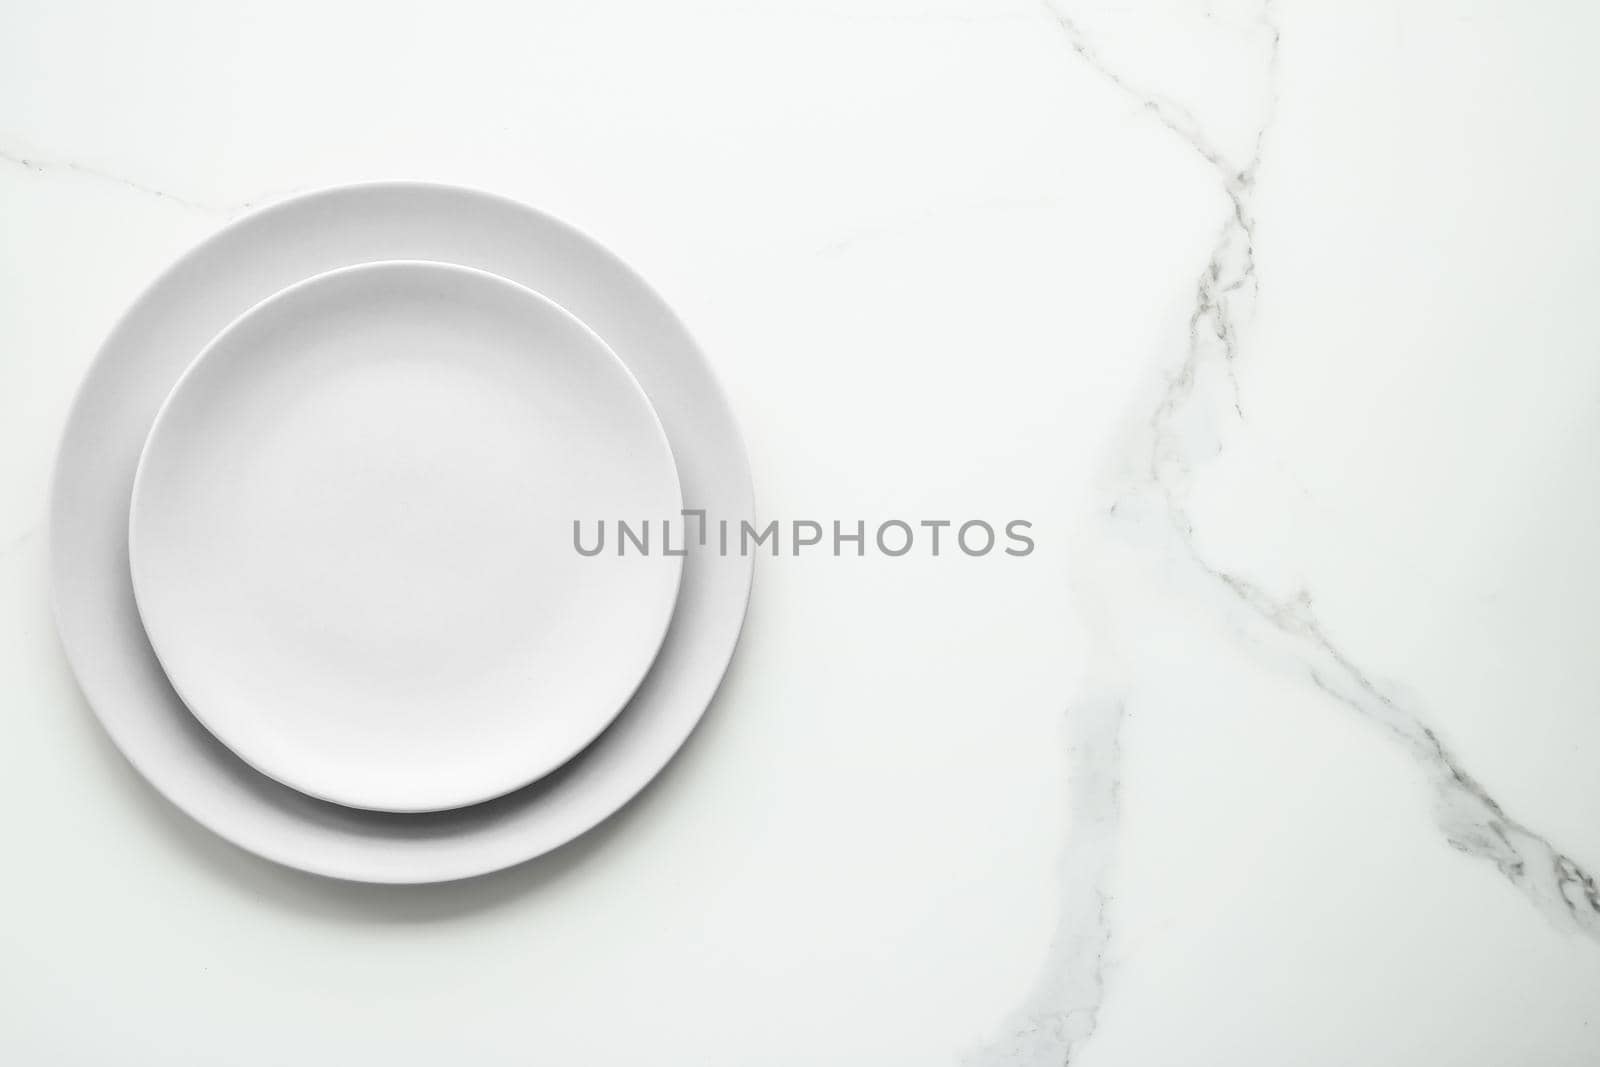 Serve the perfect plate by Anneleven